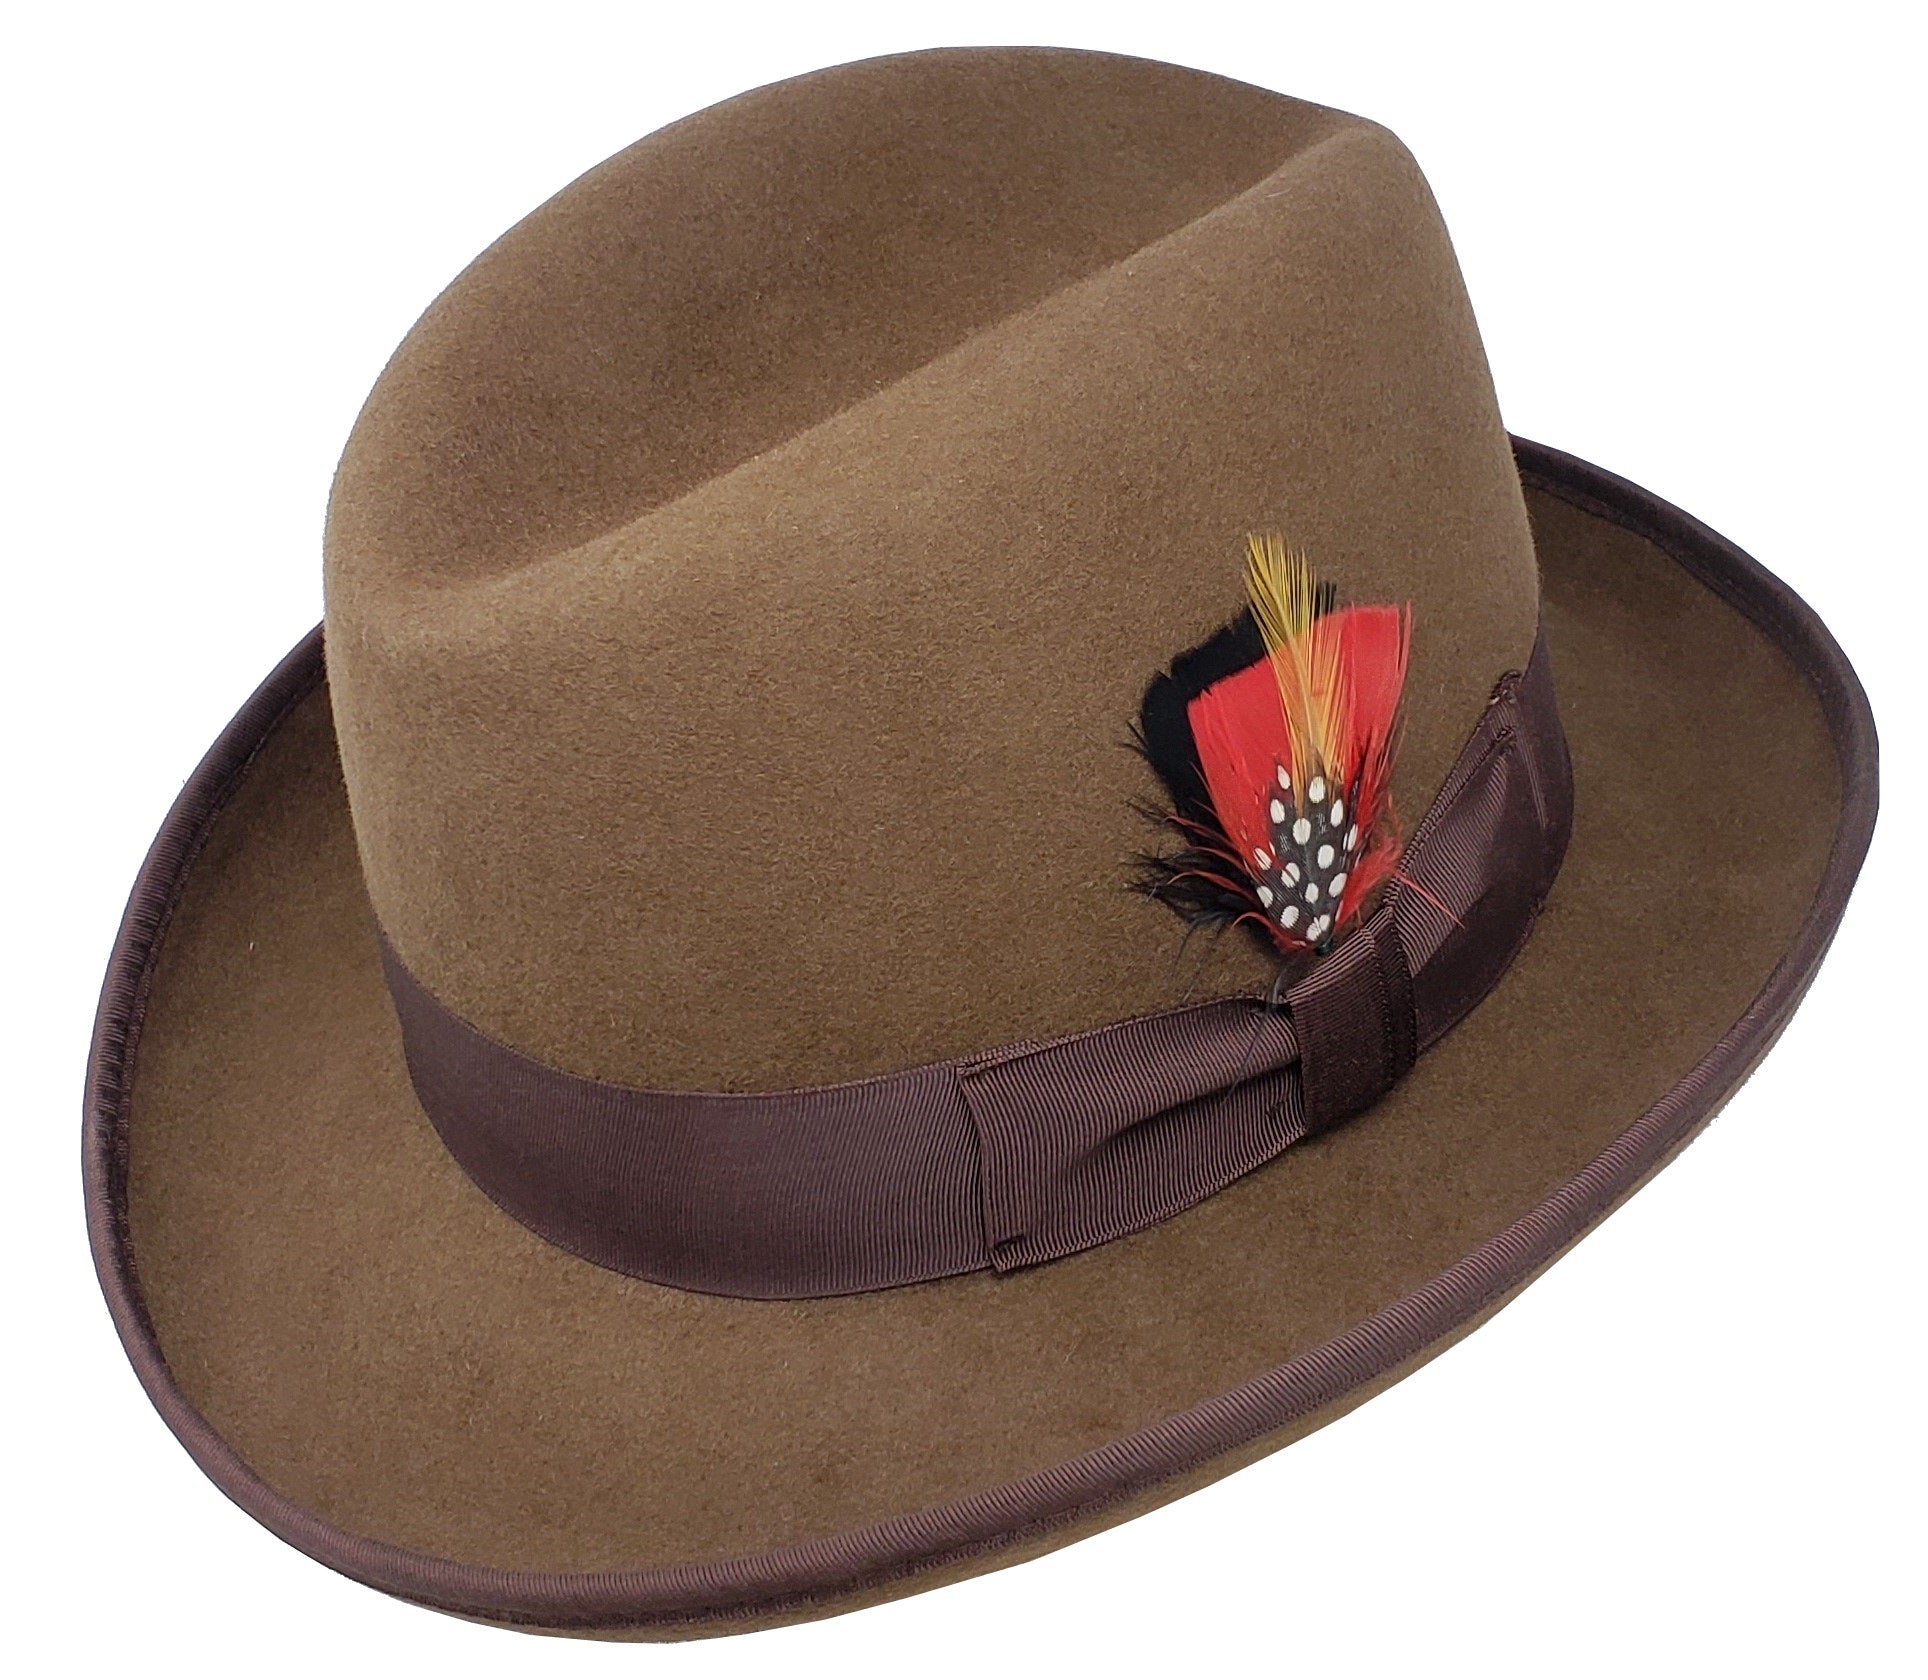 Different Touch Men's 100% Wool Felt Homburg Style Godfather Hats